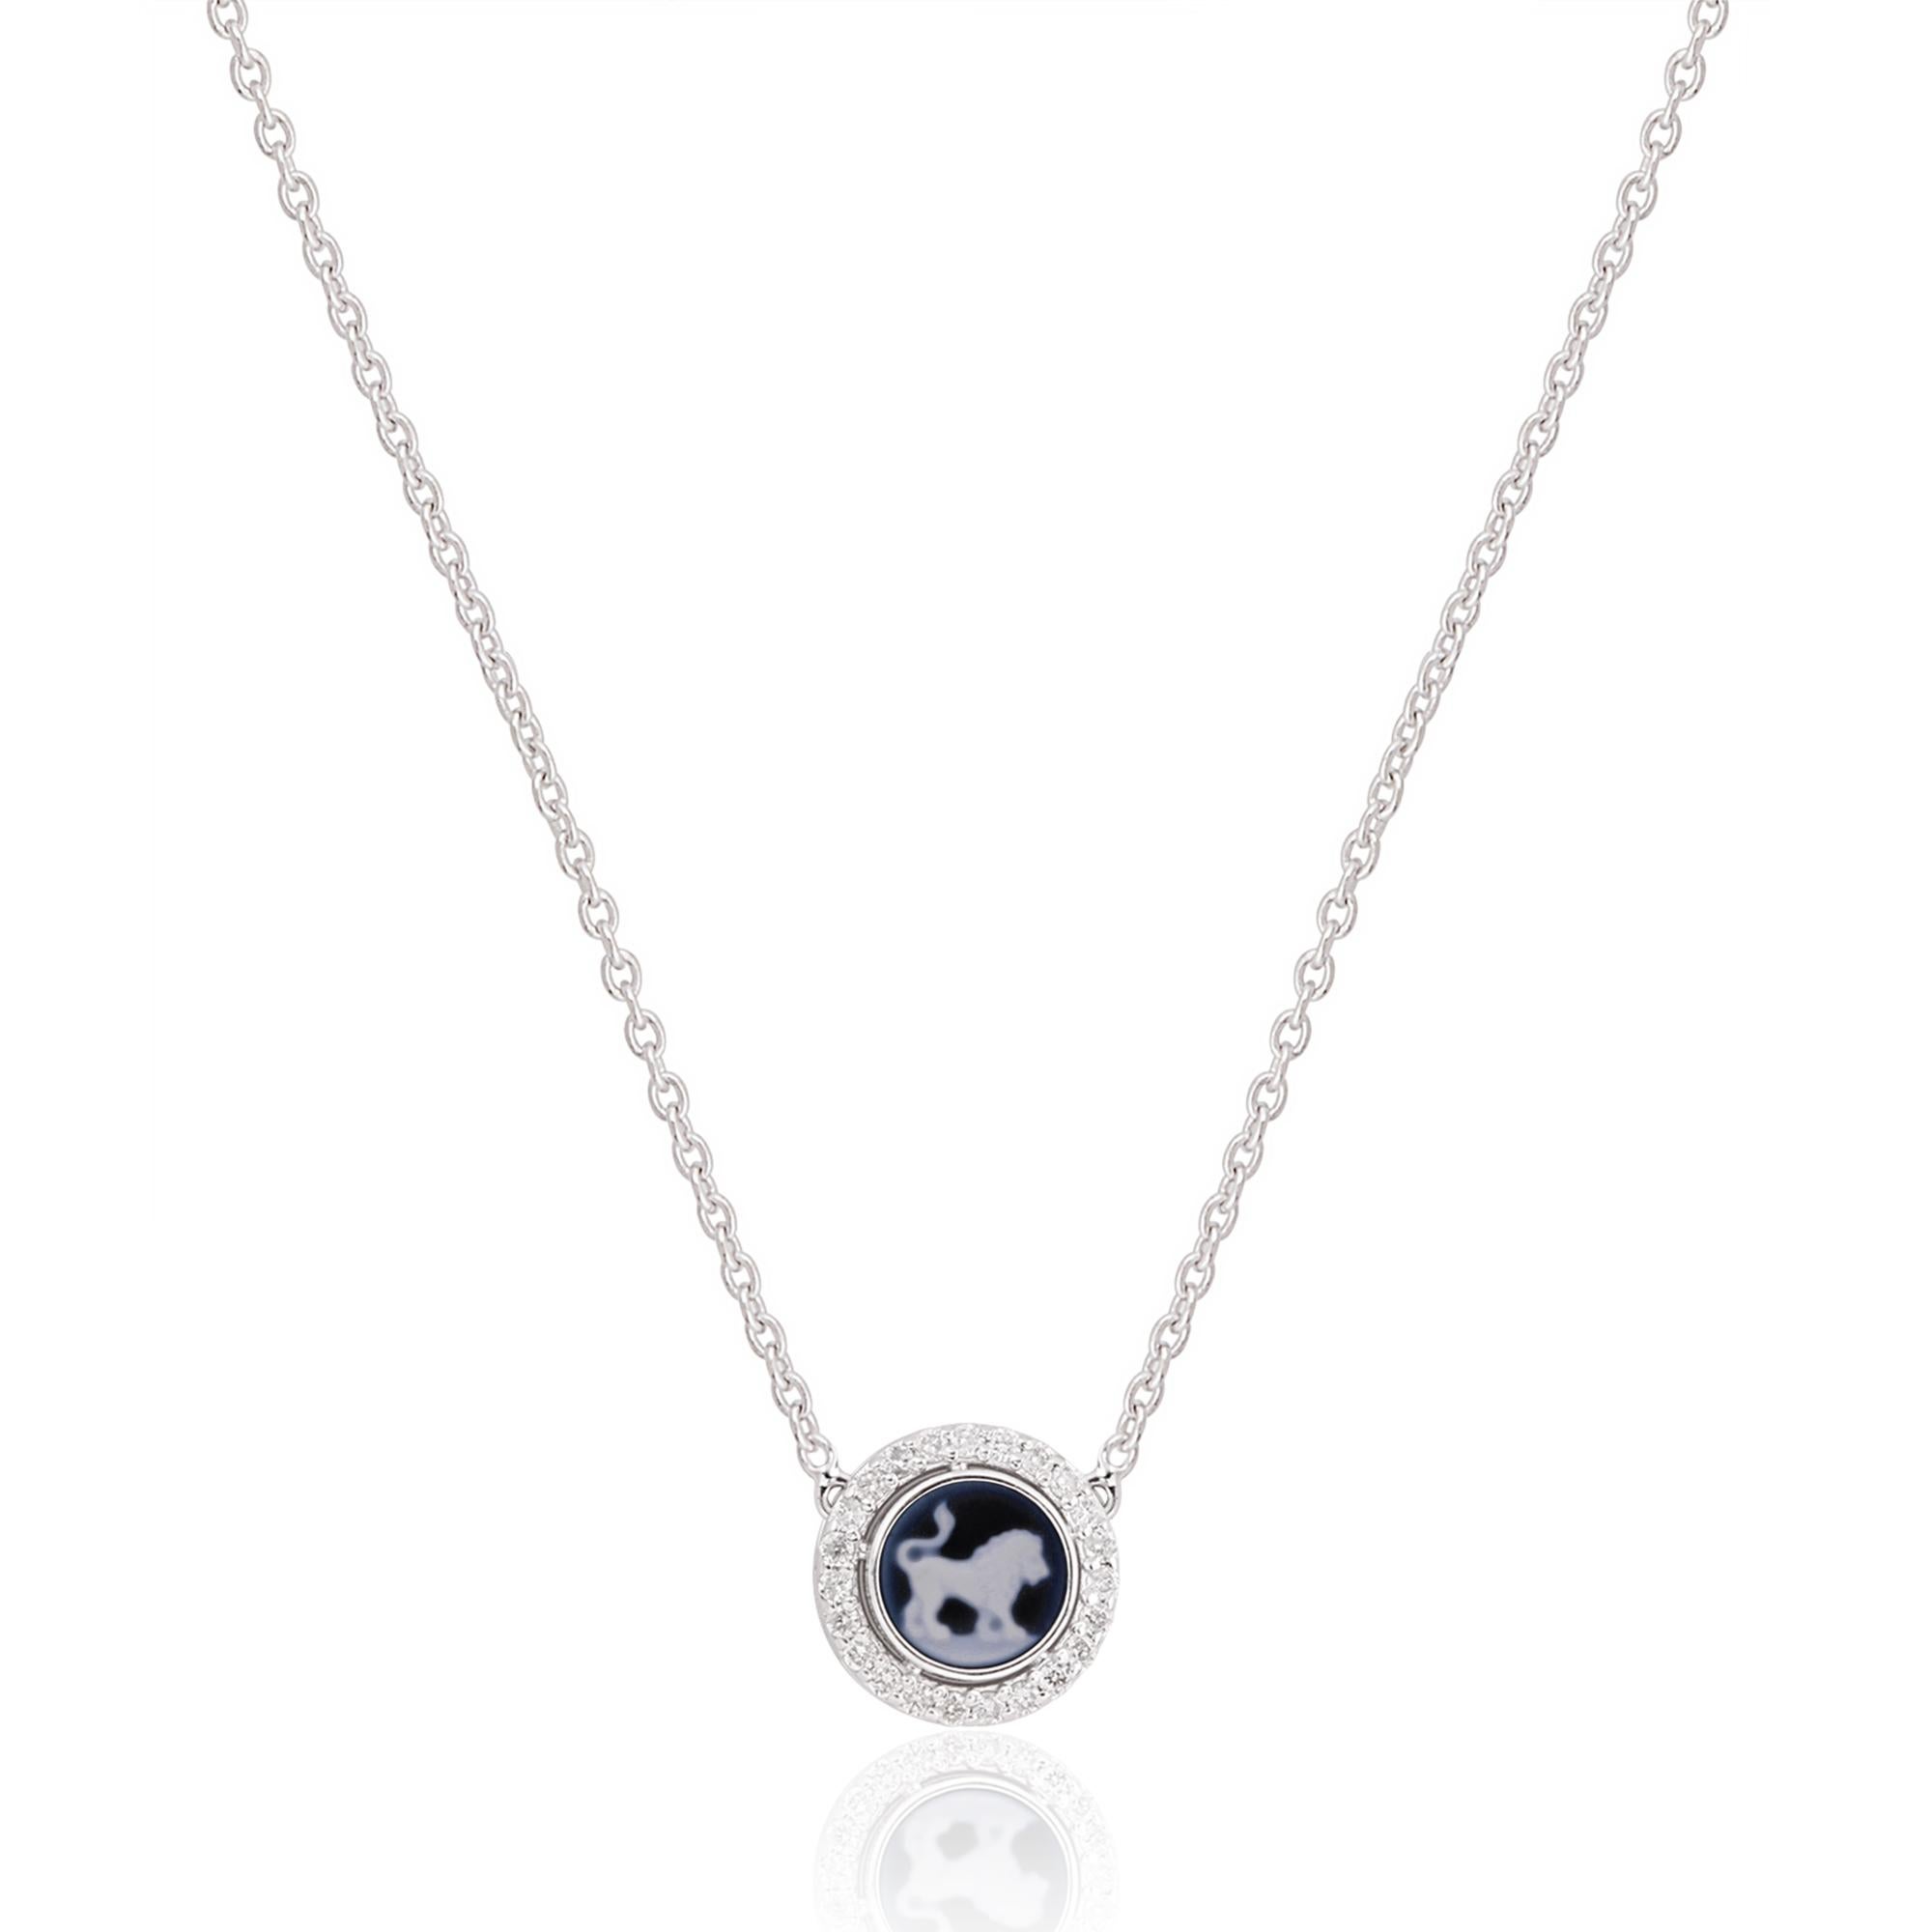 Make a bold statement with this exquisite Leo carving gemstone zodiac diamond charm necklace. Crafted in 14-karat white gold, this fine jewelry piece showcases a meticulously carved Leo zodiac symbol adorned with dazzling diamonds, creating a